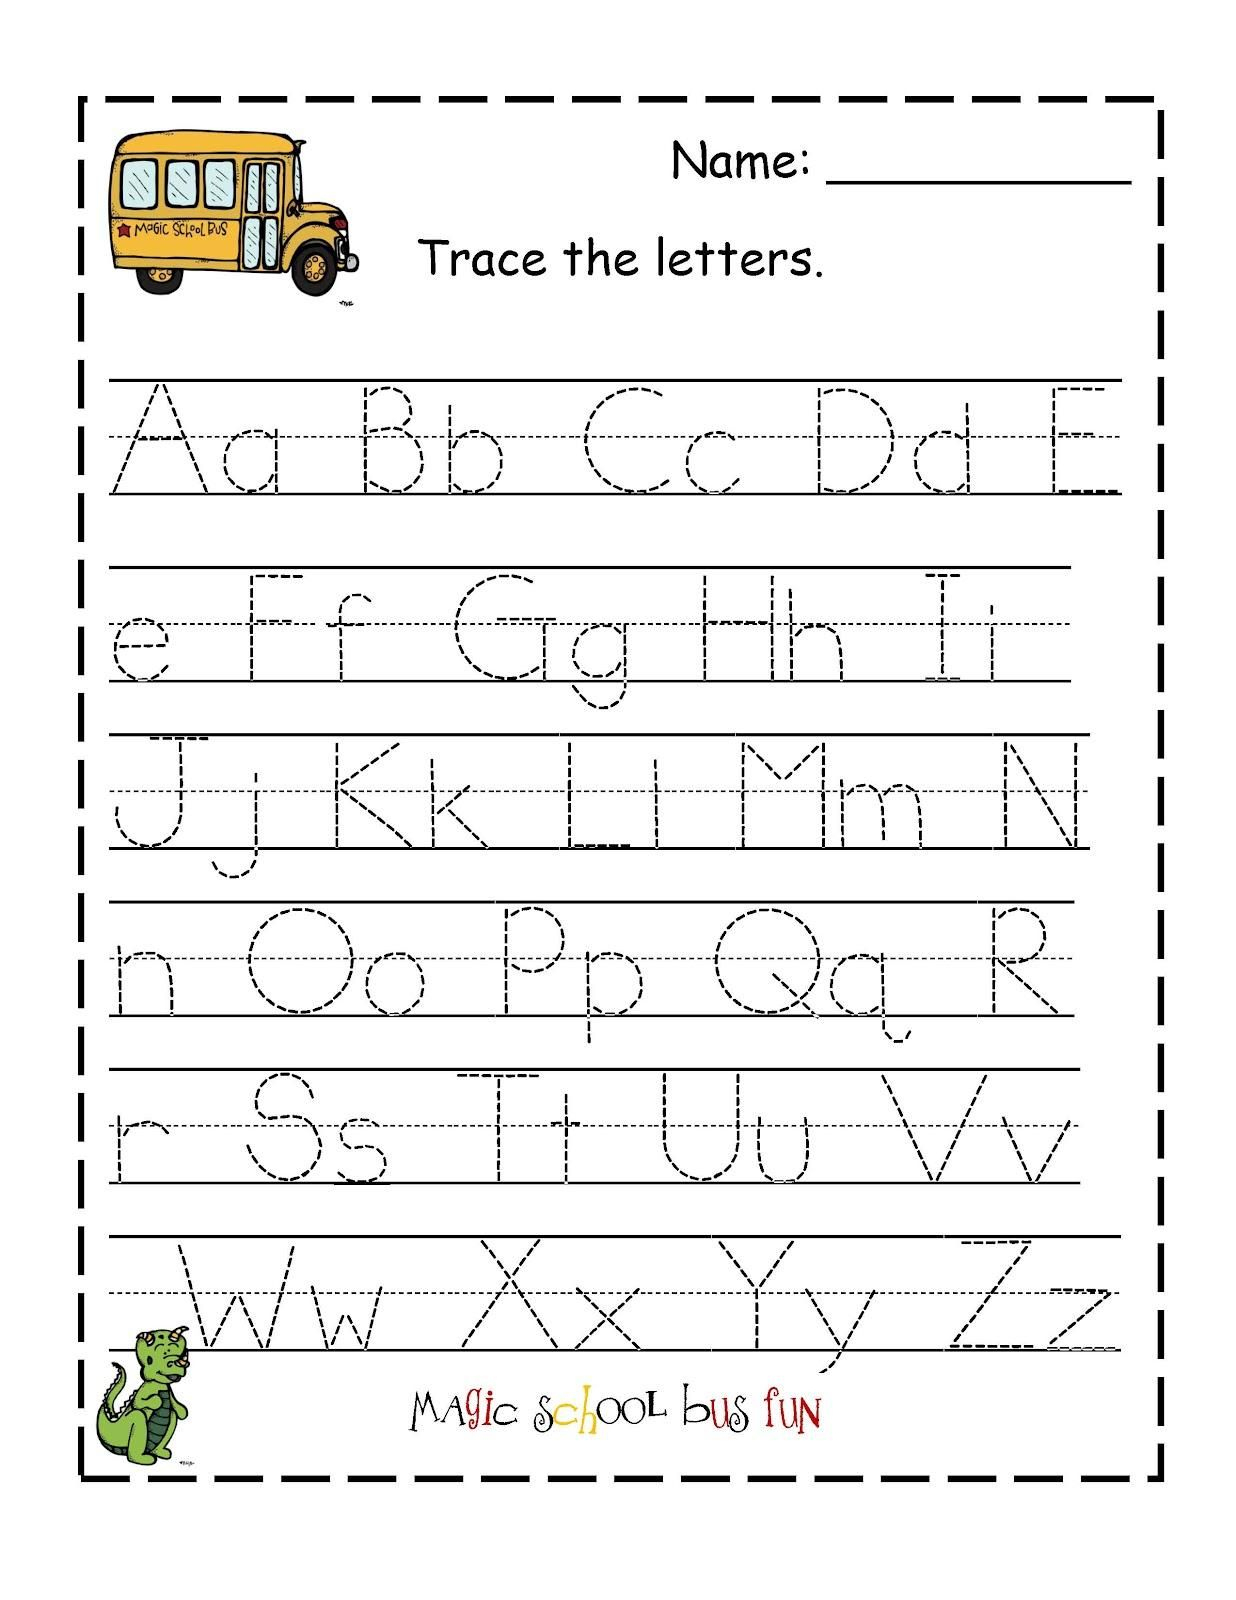 Free Printable Abc Tracing Worksheets #2 | Places To Visit - Free Printable Name Tracing Worksheets For Preschoolers